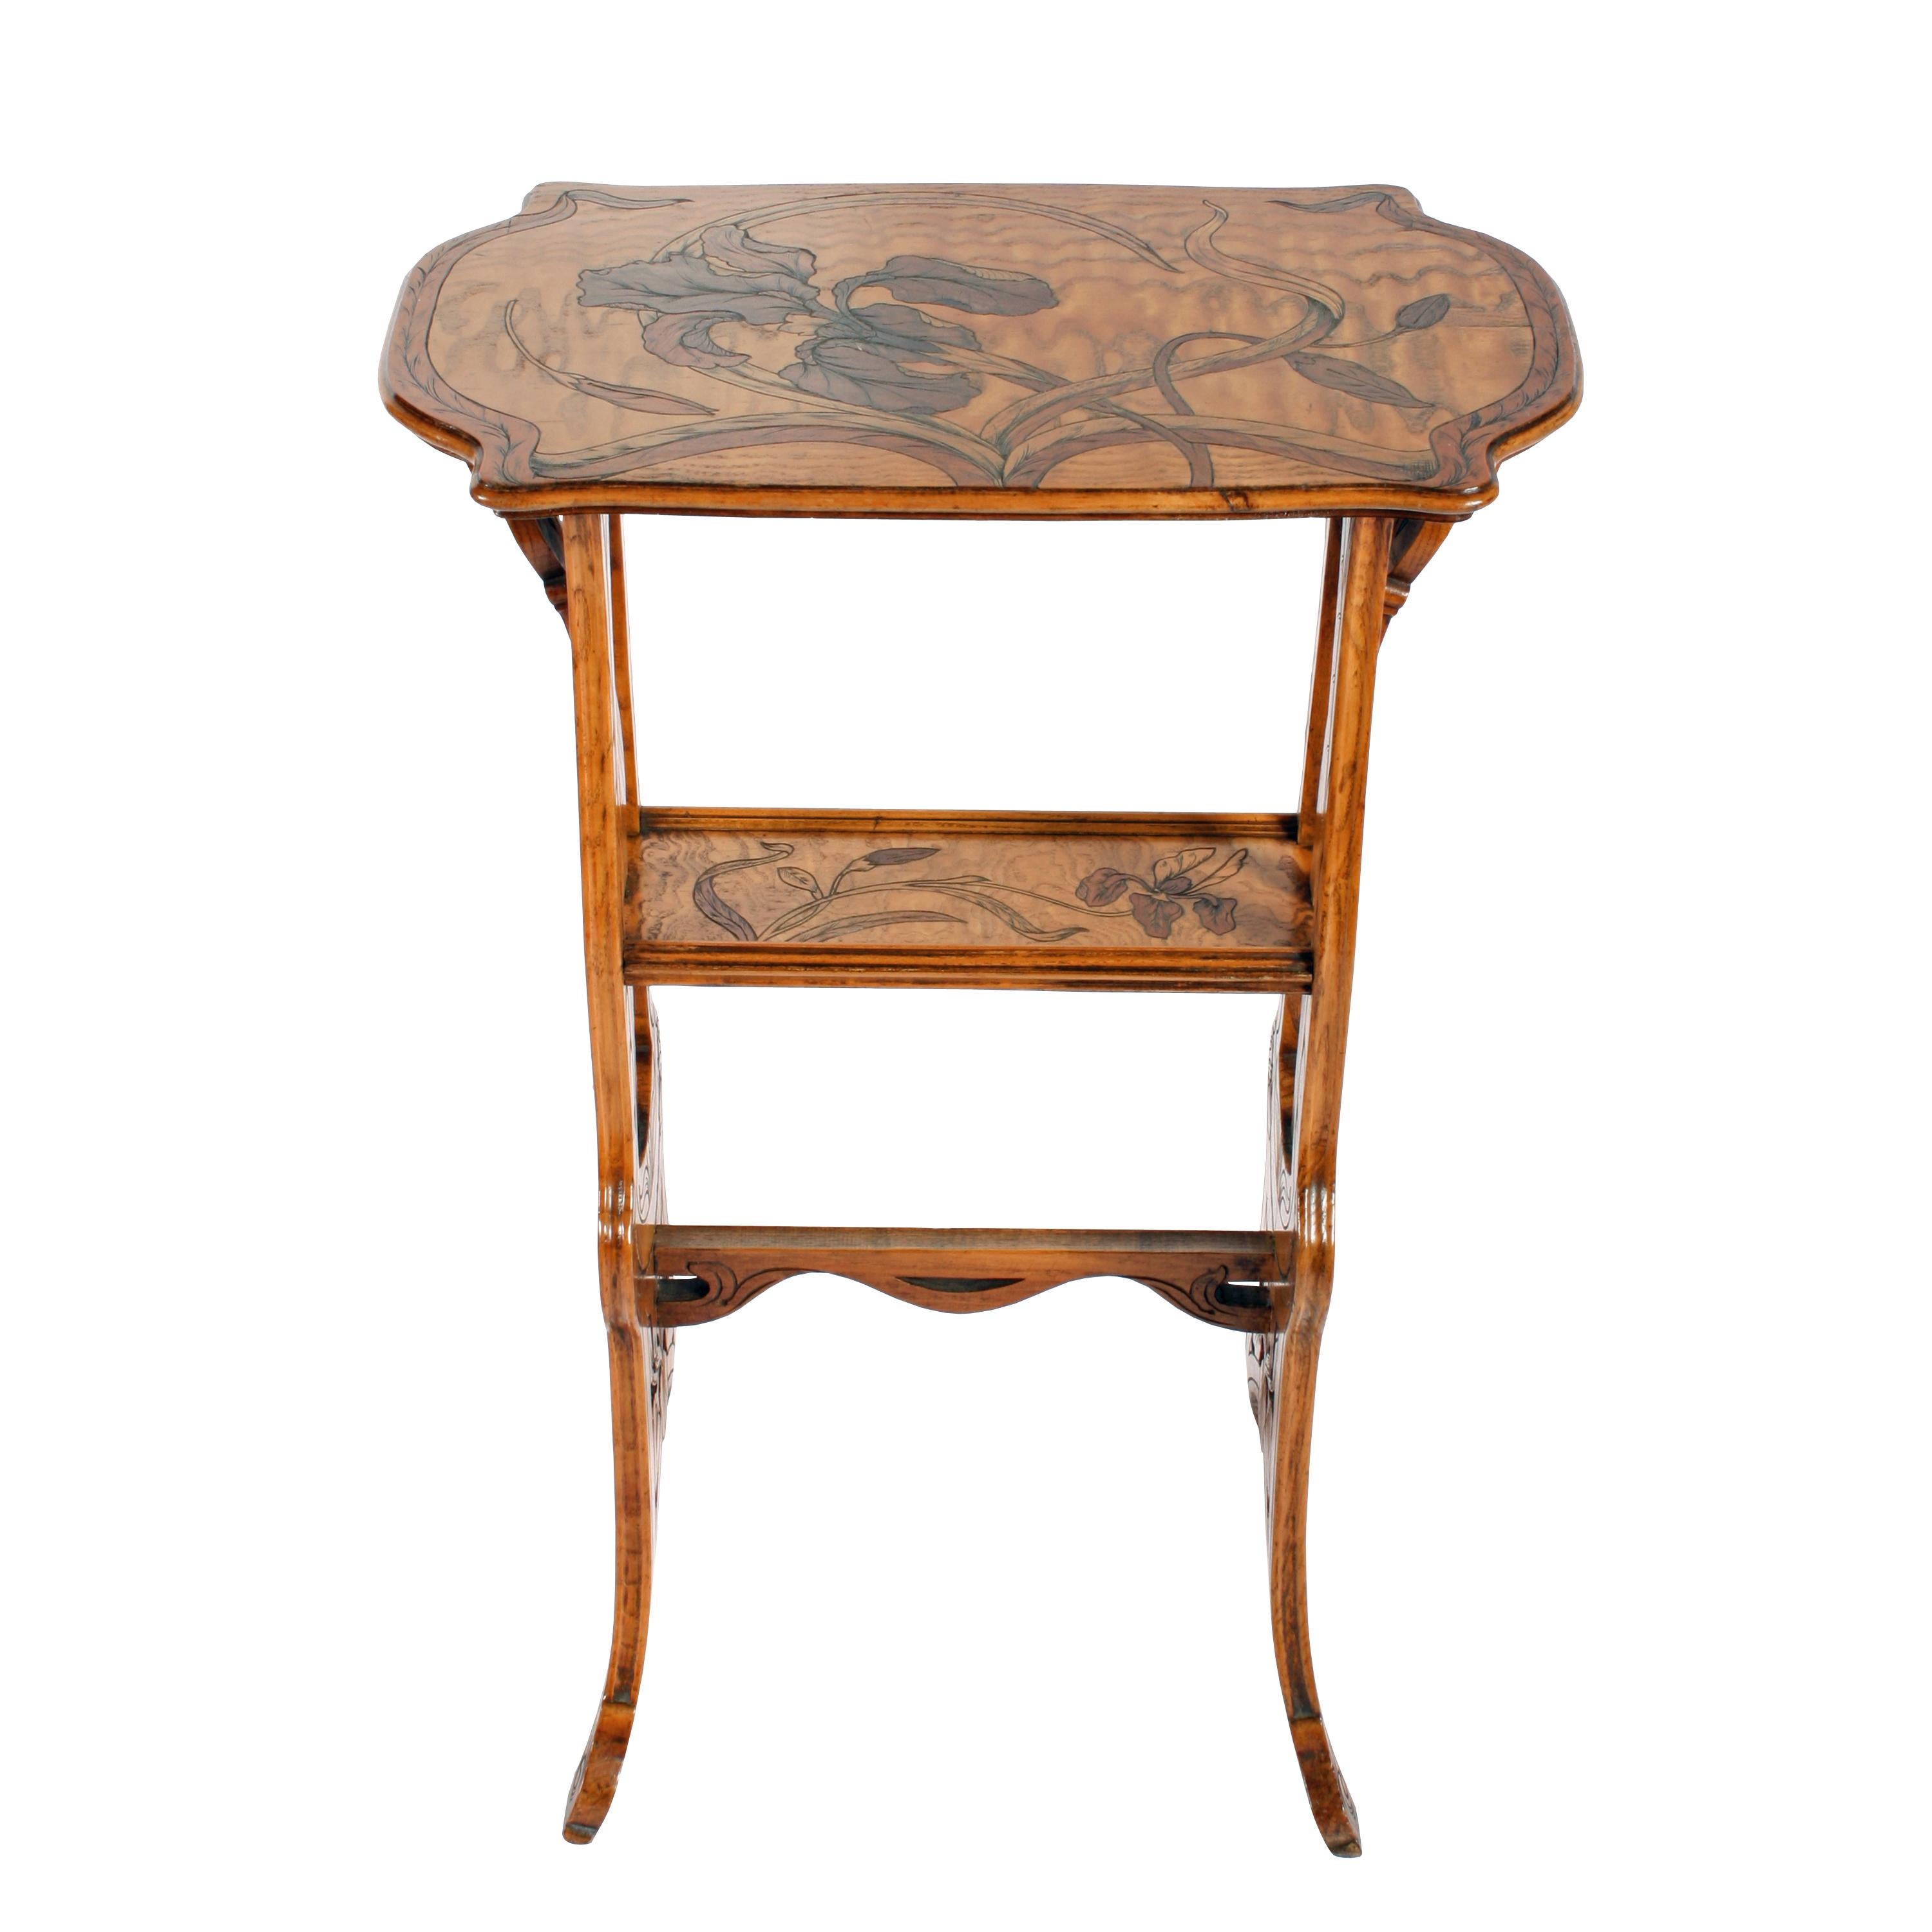 Art Nouveau Marquetry Inlaid Ash Table Attributed to Émile Gallé